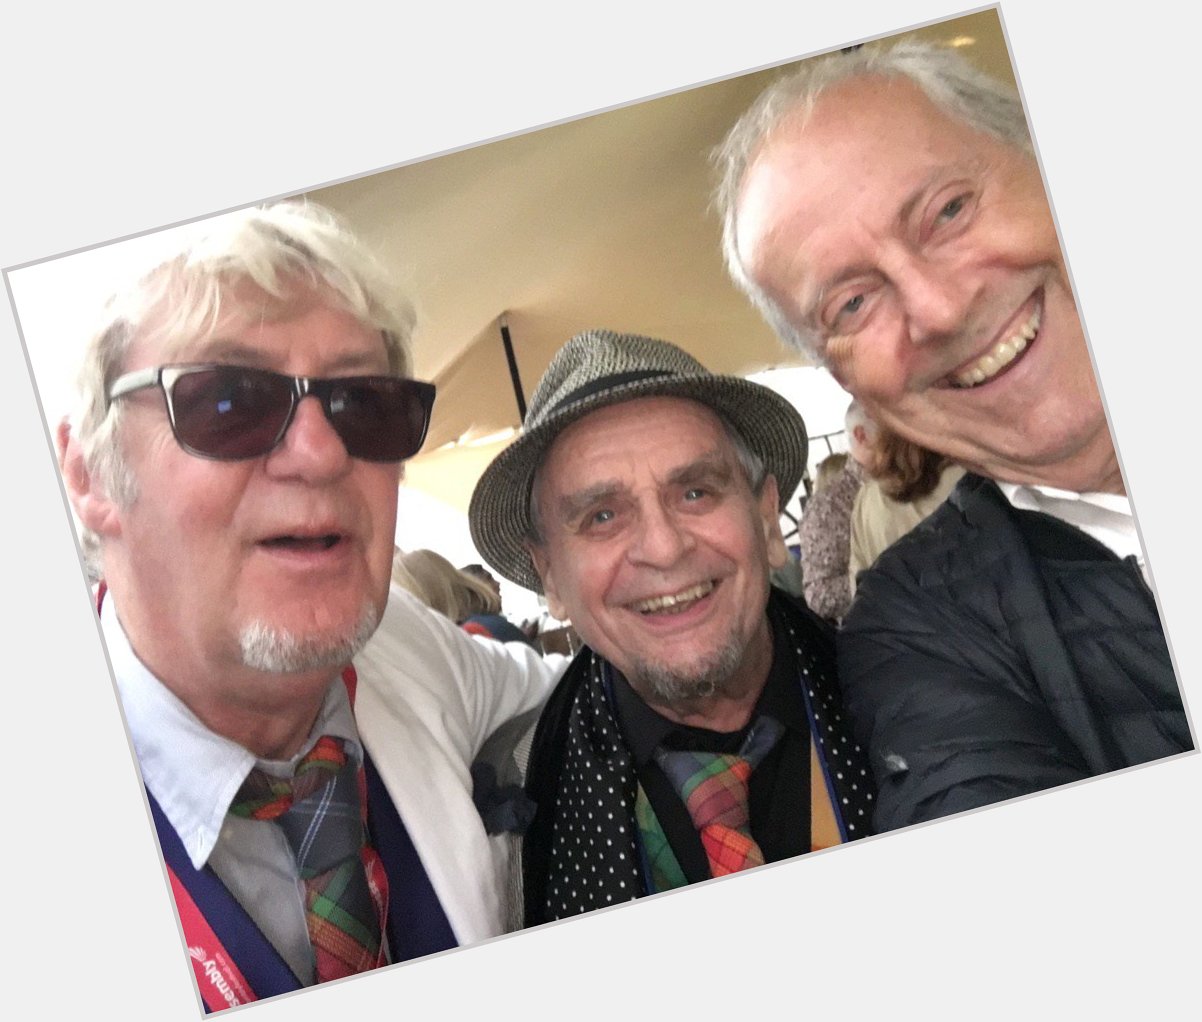 Honoured to be with John Bett saluting the great Sylvester McCoy - 75 today!  Happy birthday Sylvester! 